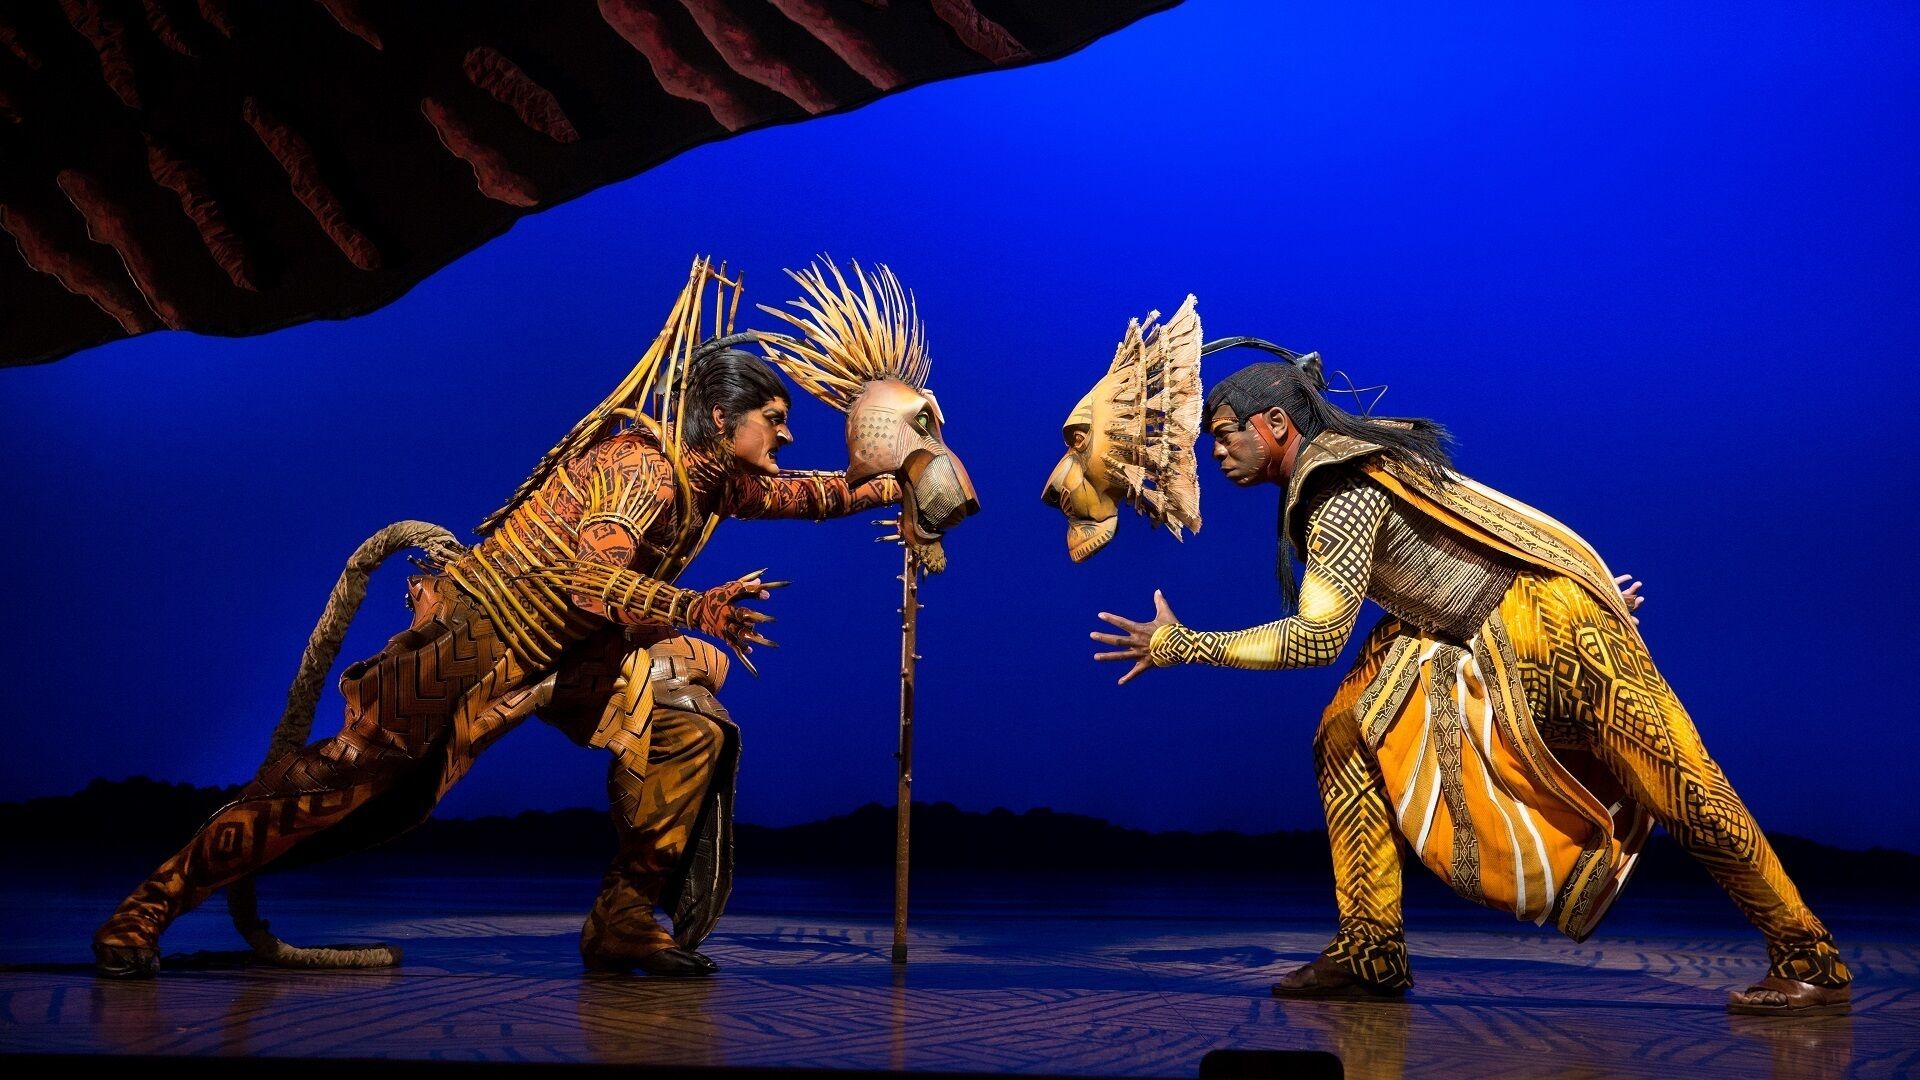 download the lion king broadway discount